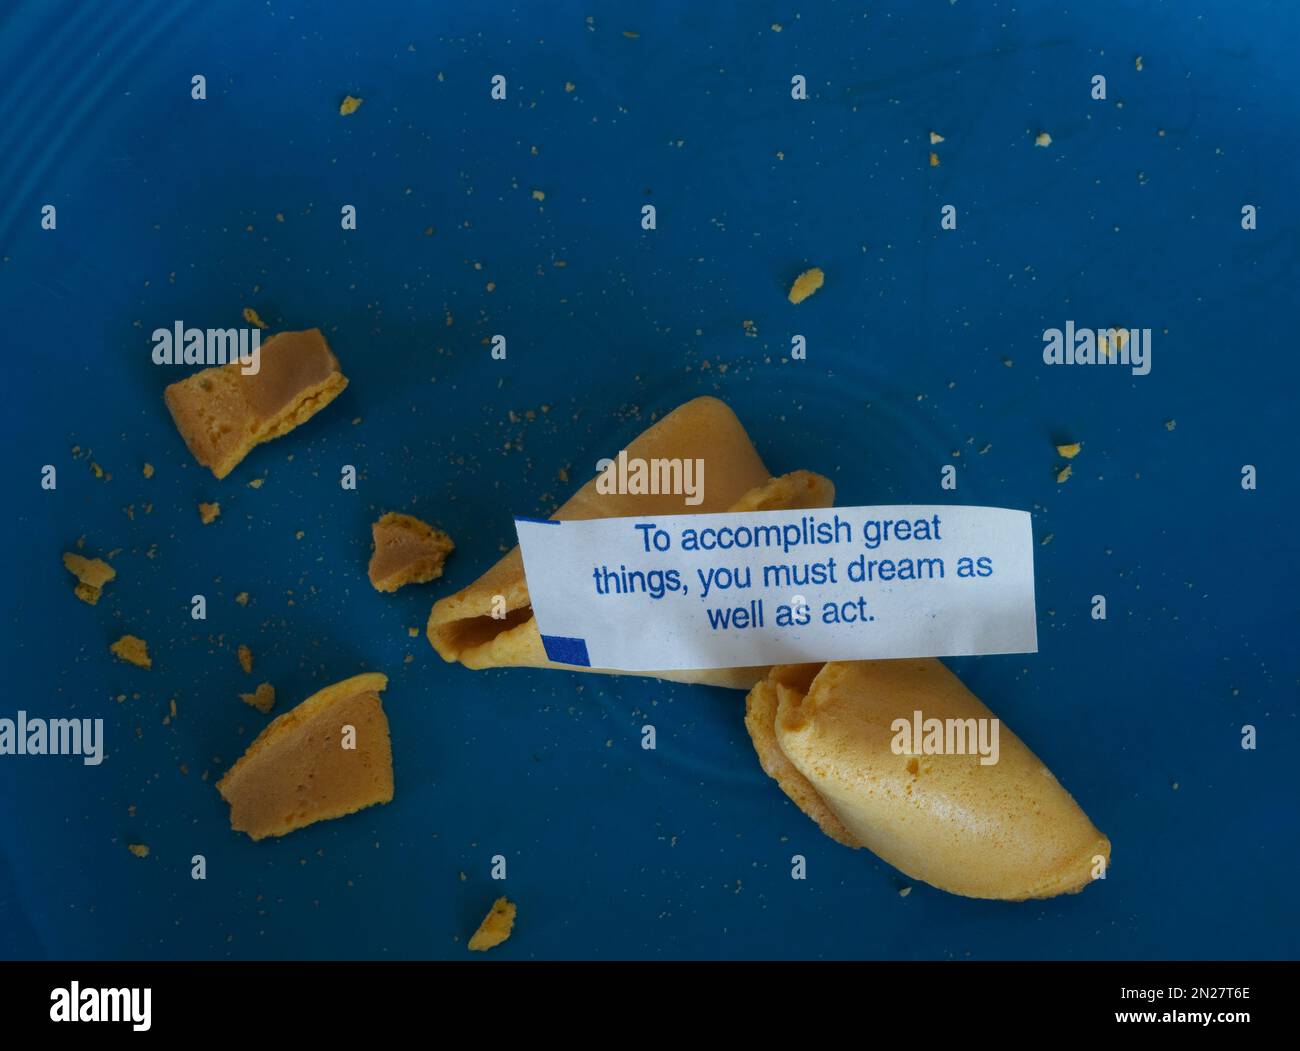 Dream and act to accomplish great things.  Fortune cookie. Stock Photo